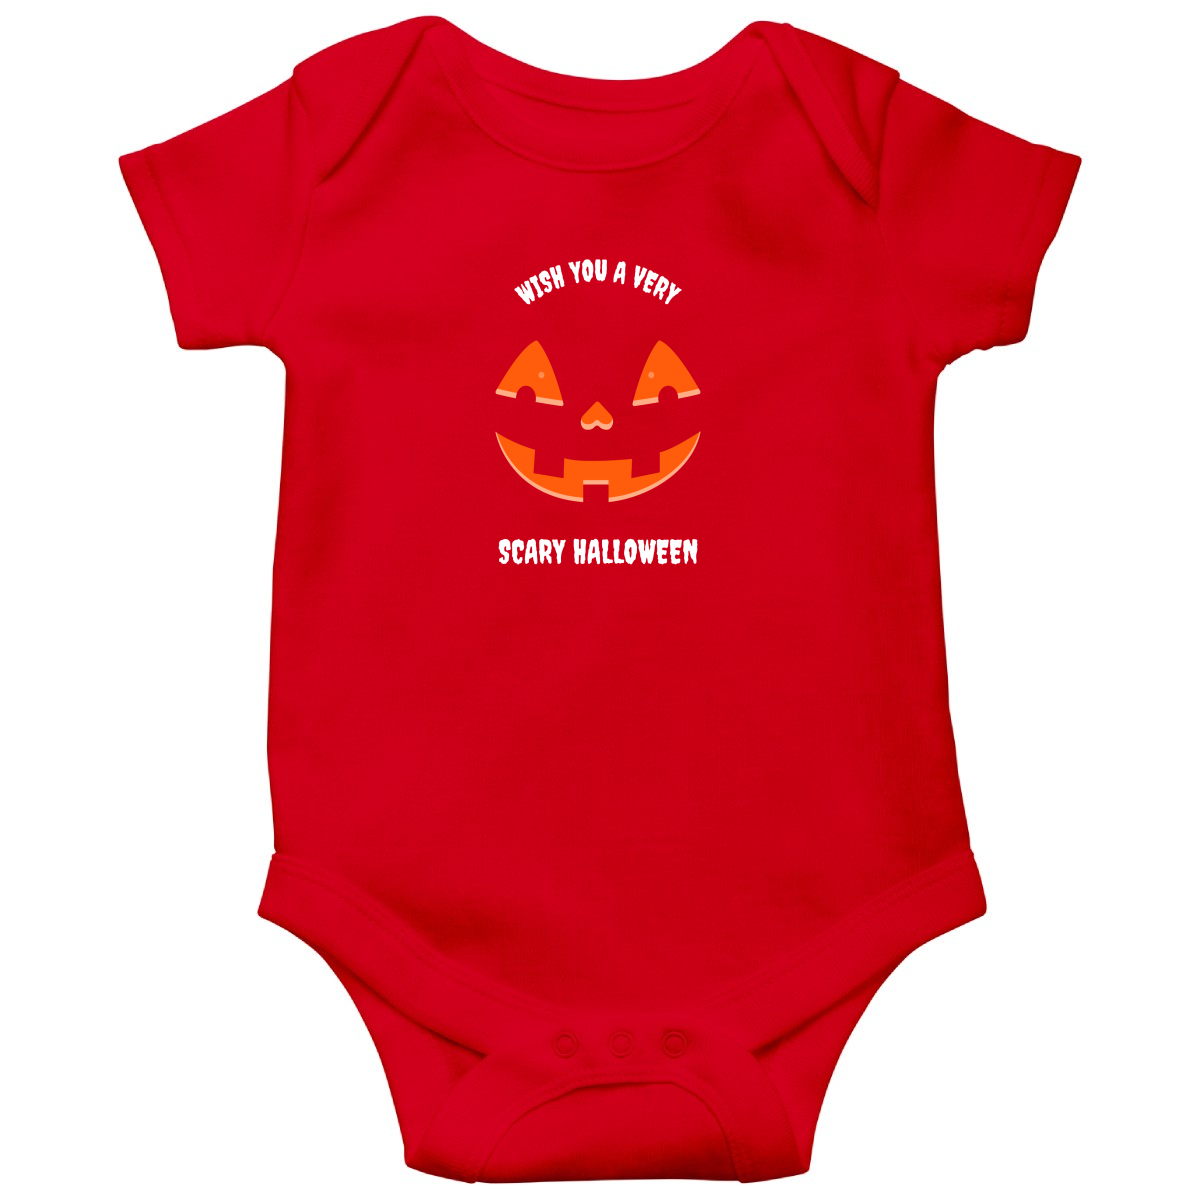 Wish You a Very Scary Halloween Baby Bodysuits | Red